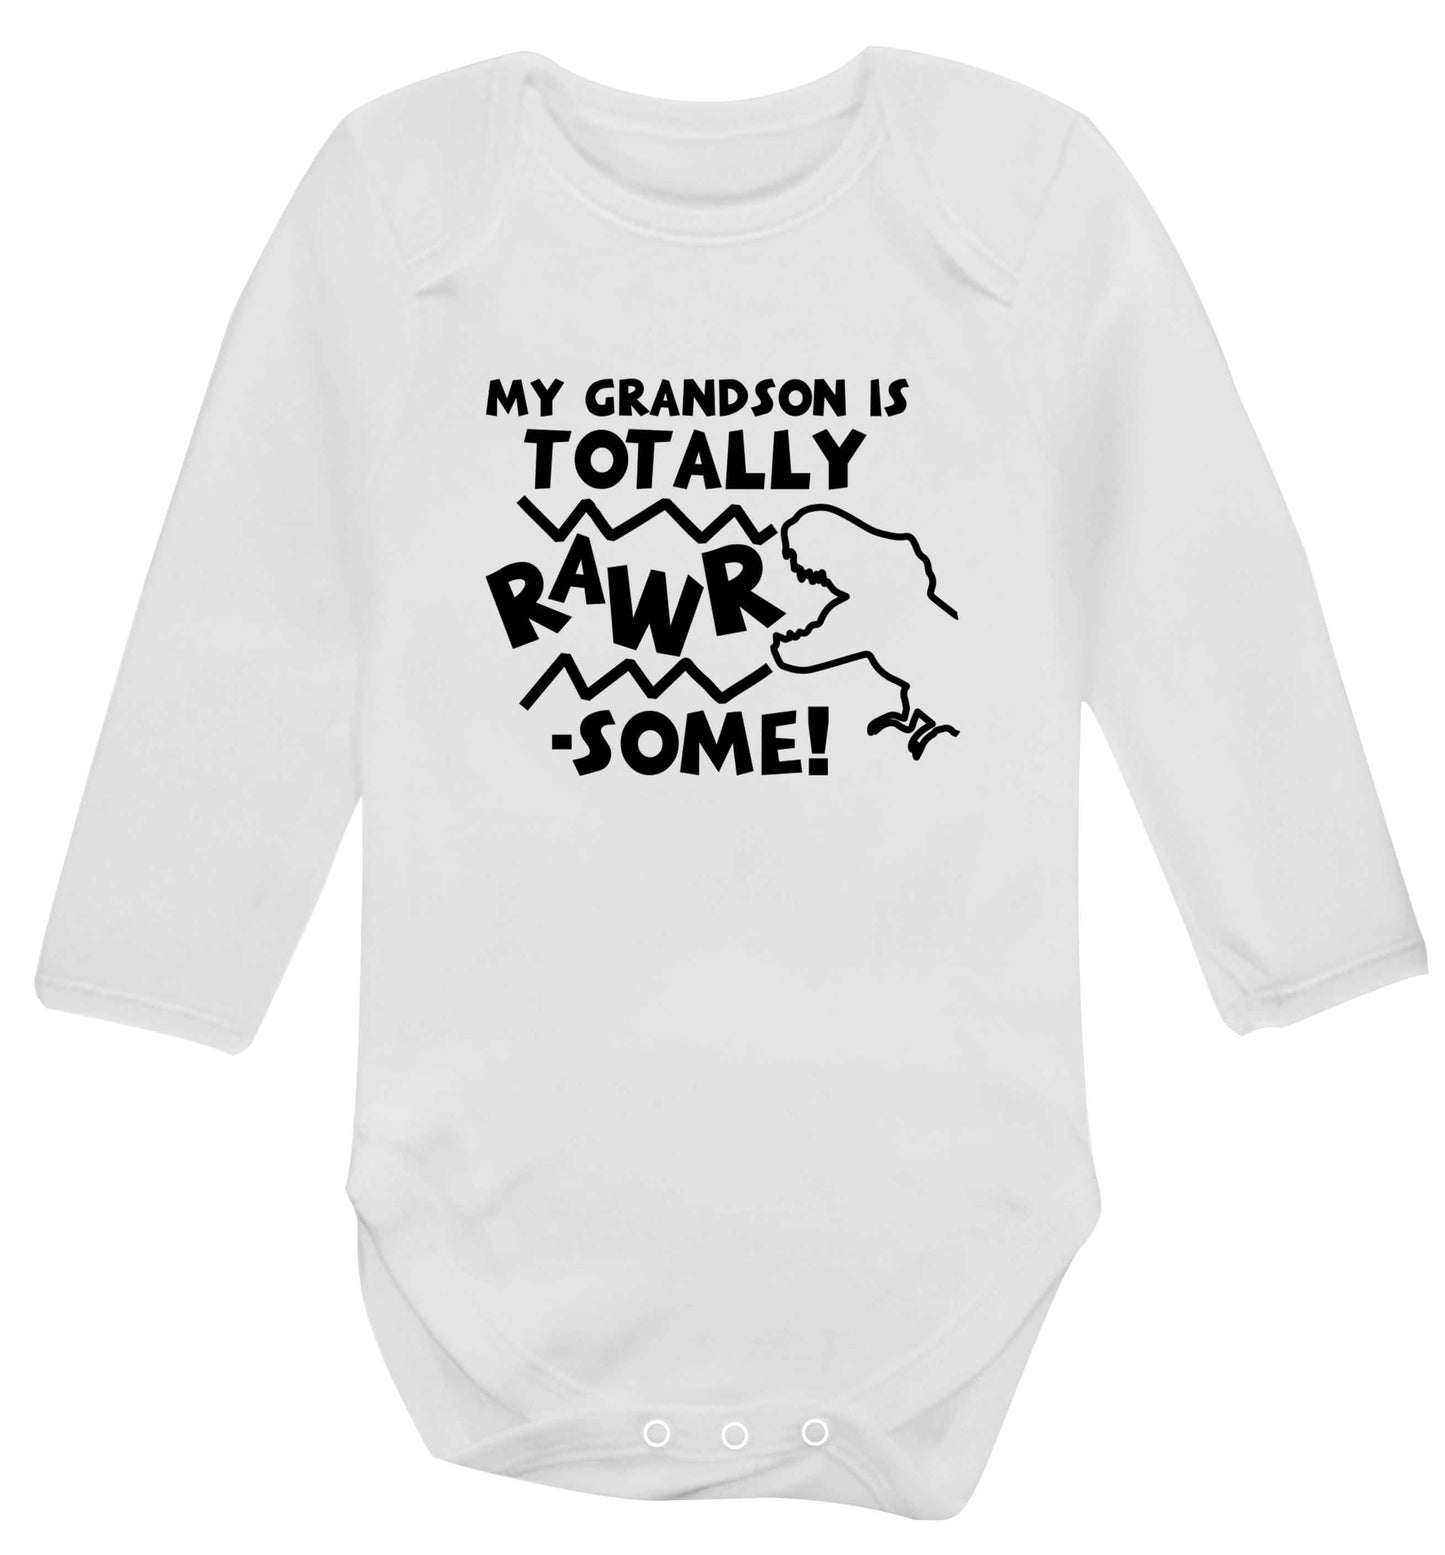 My grandson is totally rawrsome baby vest long sleeved white 6-12 months